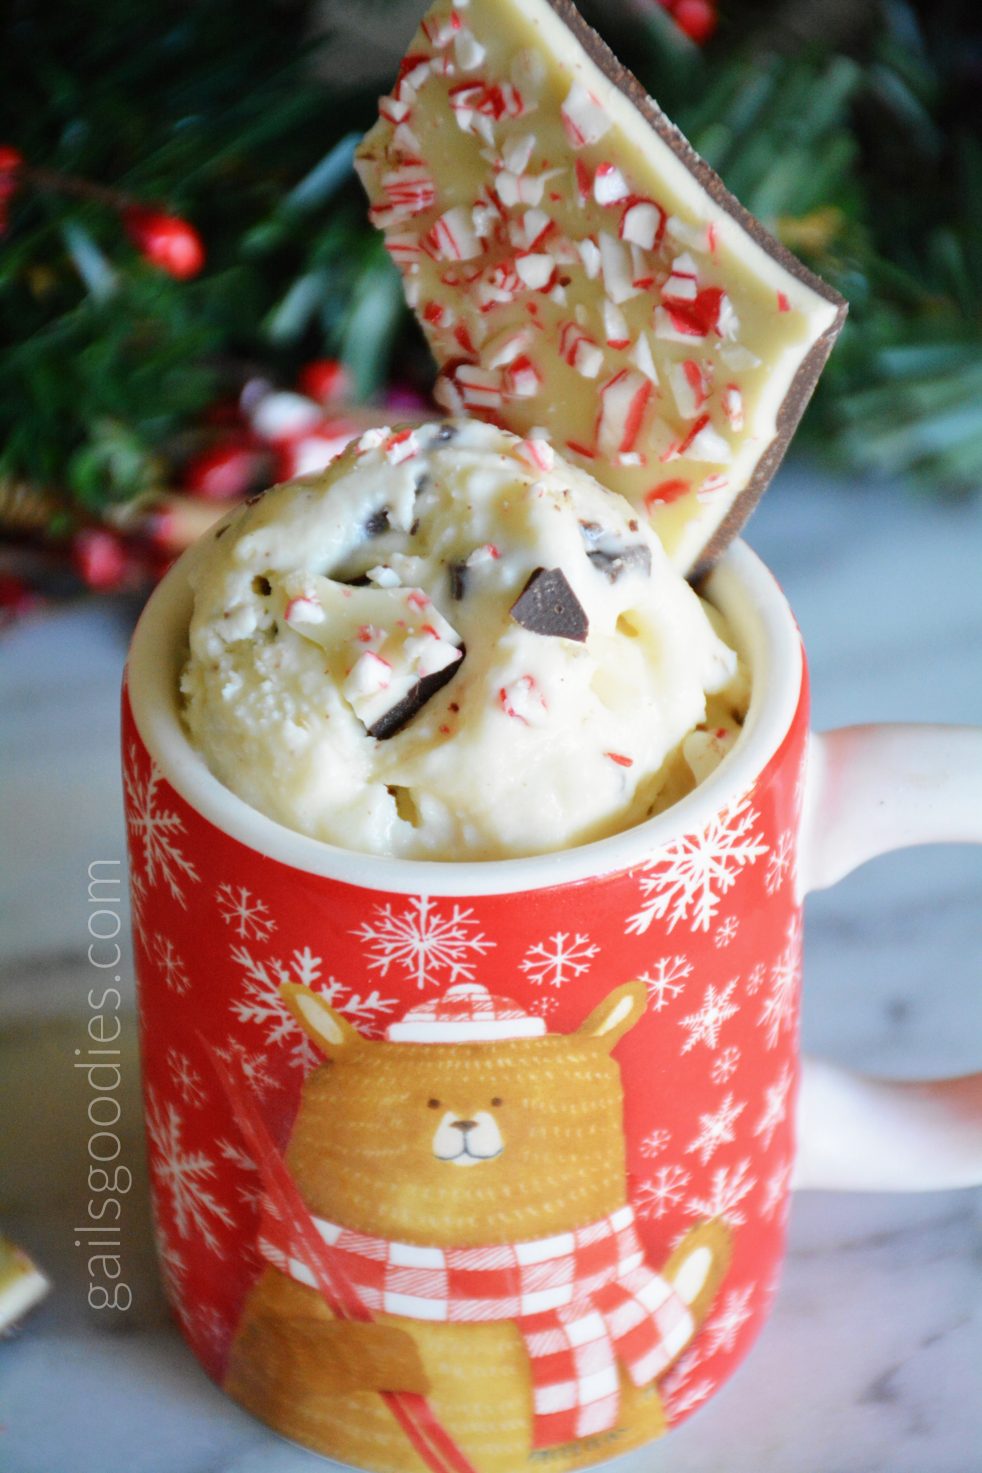 A red coffee mug with a bear and snowflakes is filled with peppermint bark ice-cream. A scoop of ice-crean extends above the top of the mug. Creamy white ice-cream is flecked with bits of peppermint, dark chocolate and peppermint bark. A small piece of peppermint bark garnishes the ice-cream at the back of the mug.